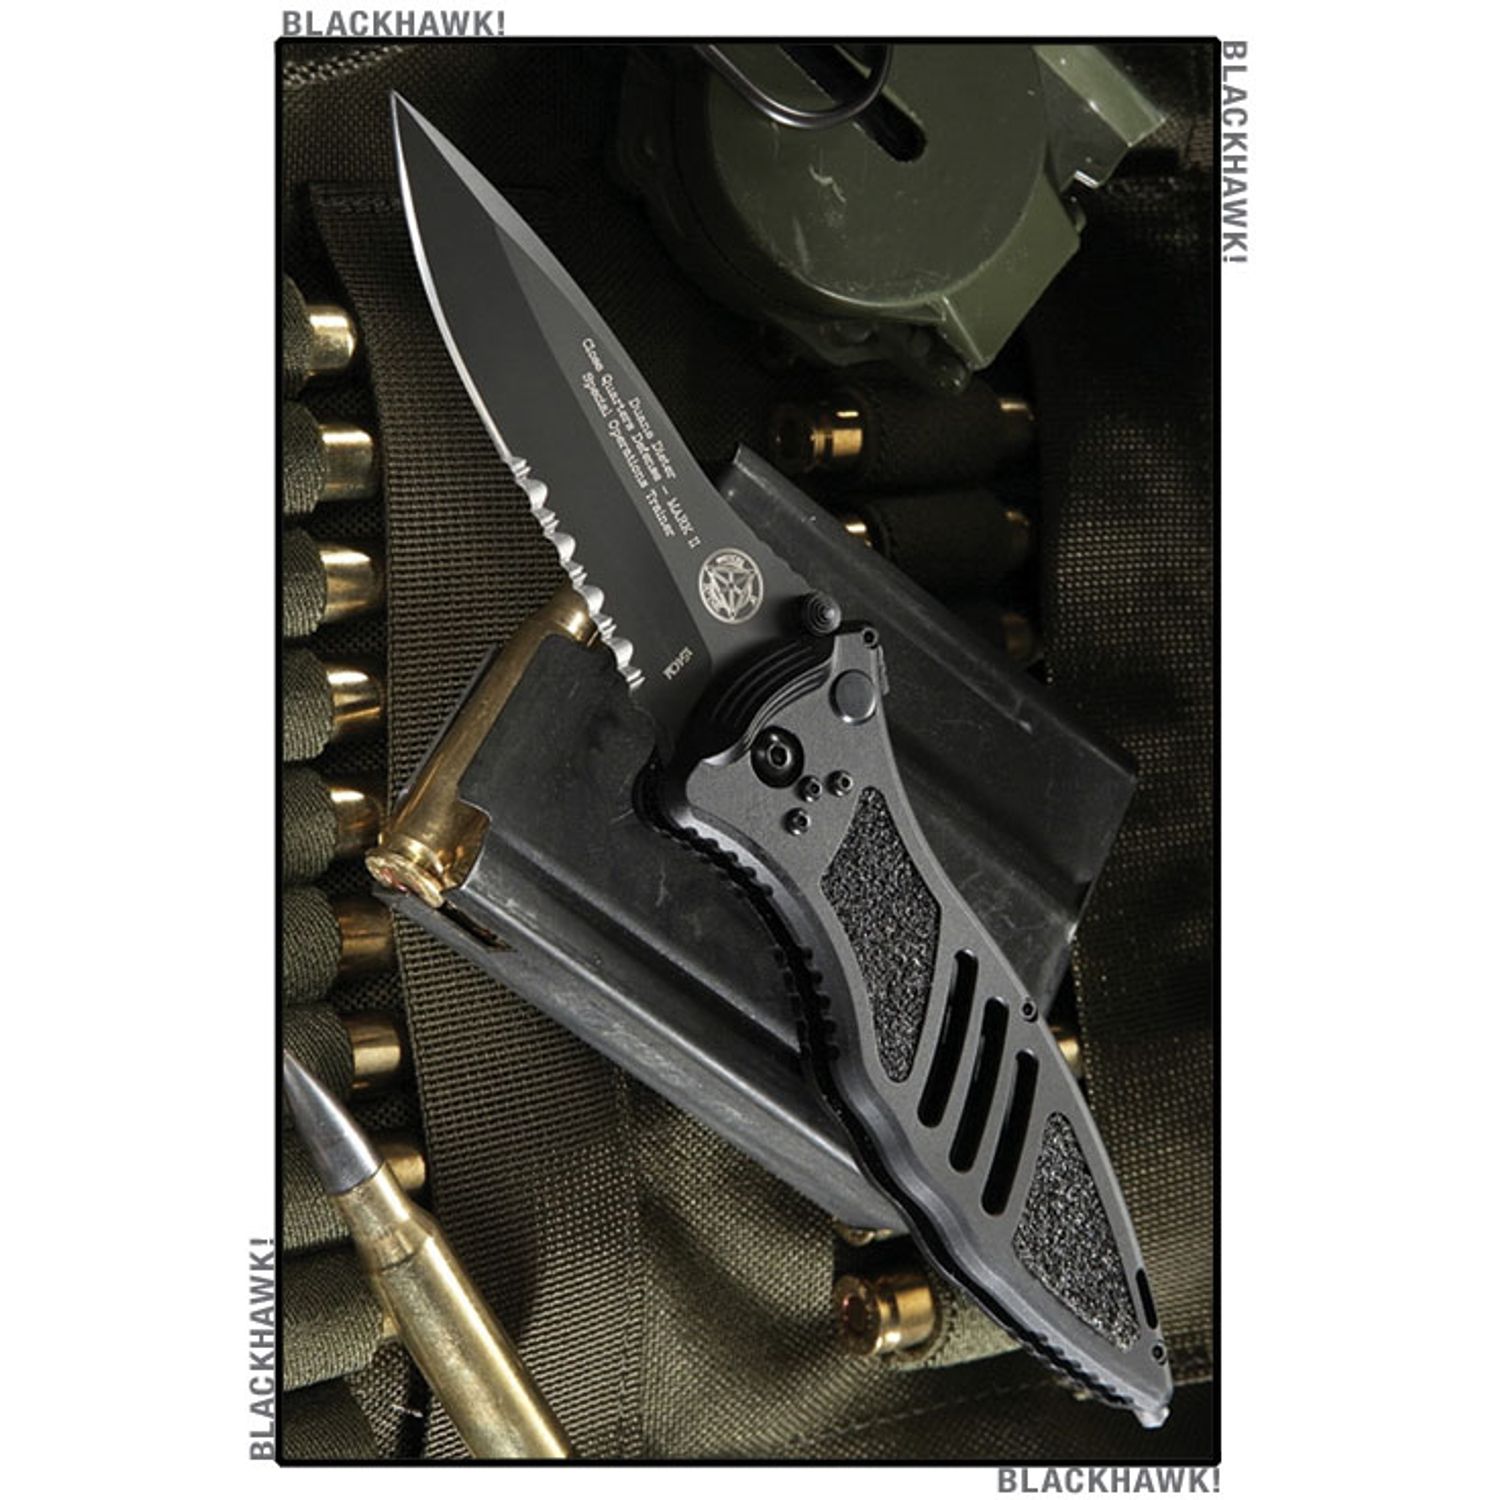 https://pics.knifecenter.com/fit-in/1500x1500/knifecenter/masters/images/808.jpg